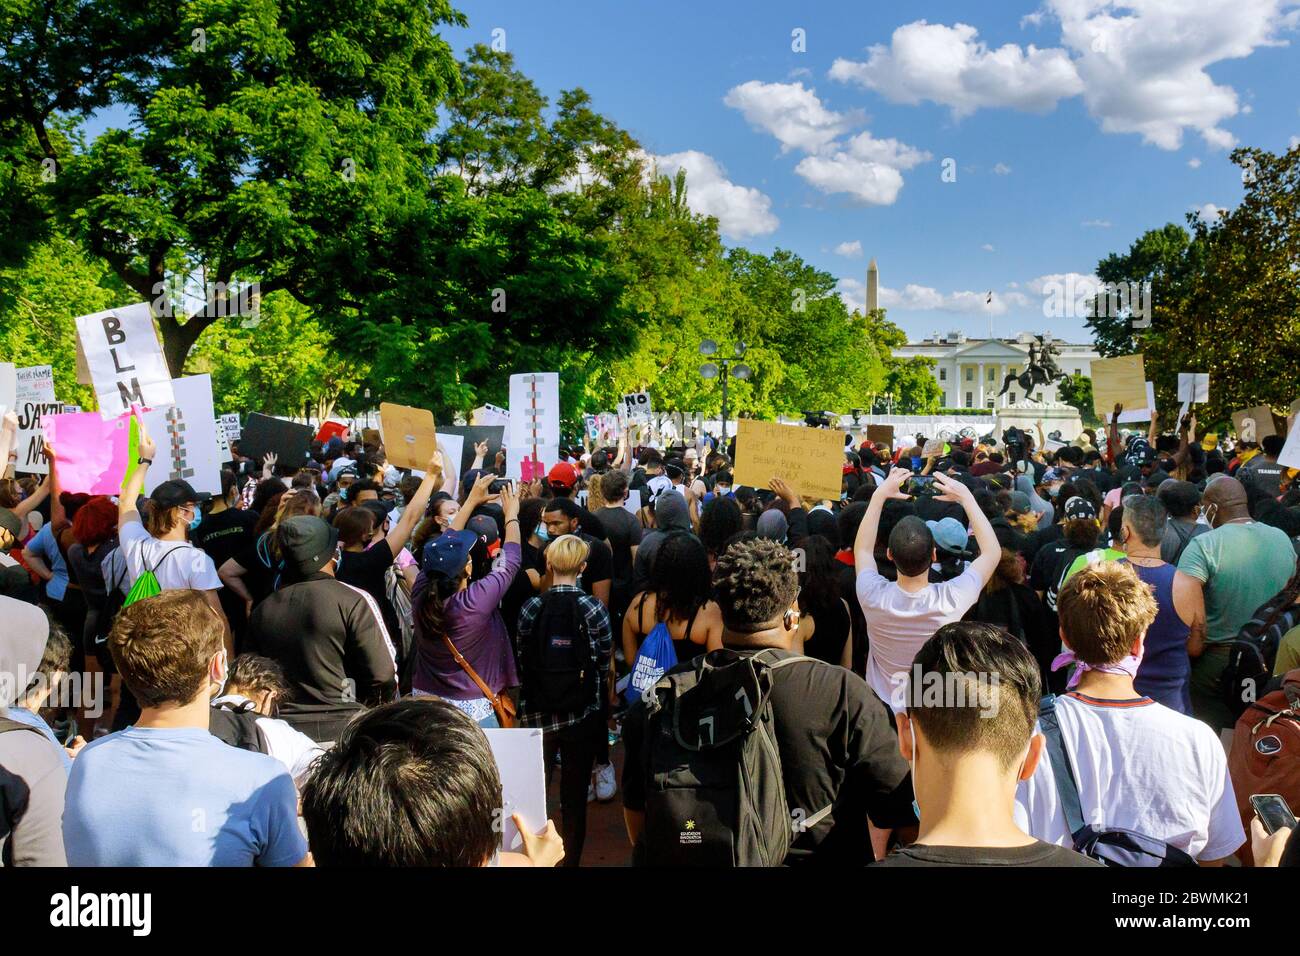 WASHINGTON D.C., USA - MAY 31, 2020: Protesters march in WASHINGTON D.C. during a rally responding to the death of Minneapolis man George Floyd at the hands of police on White House president Donald Trump Stock Photo